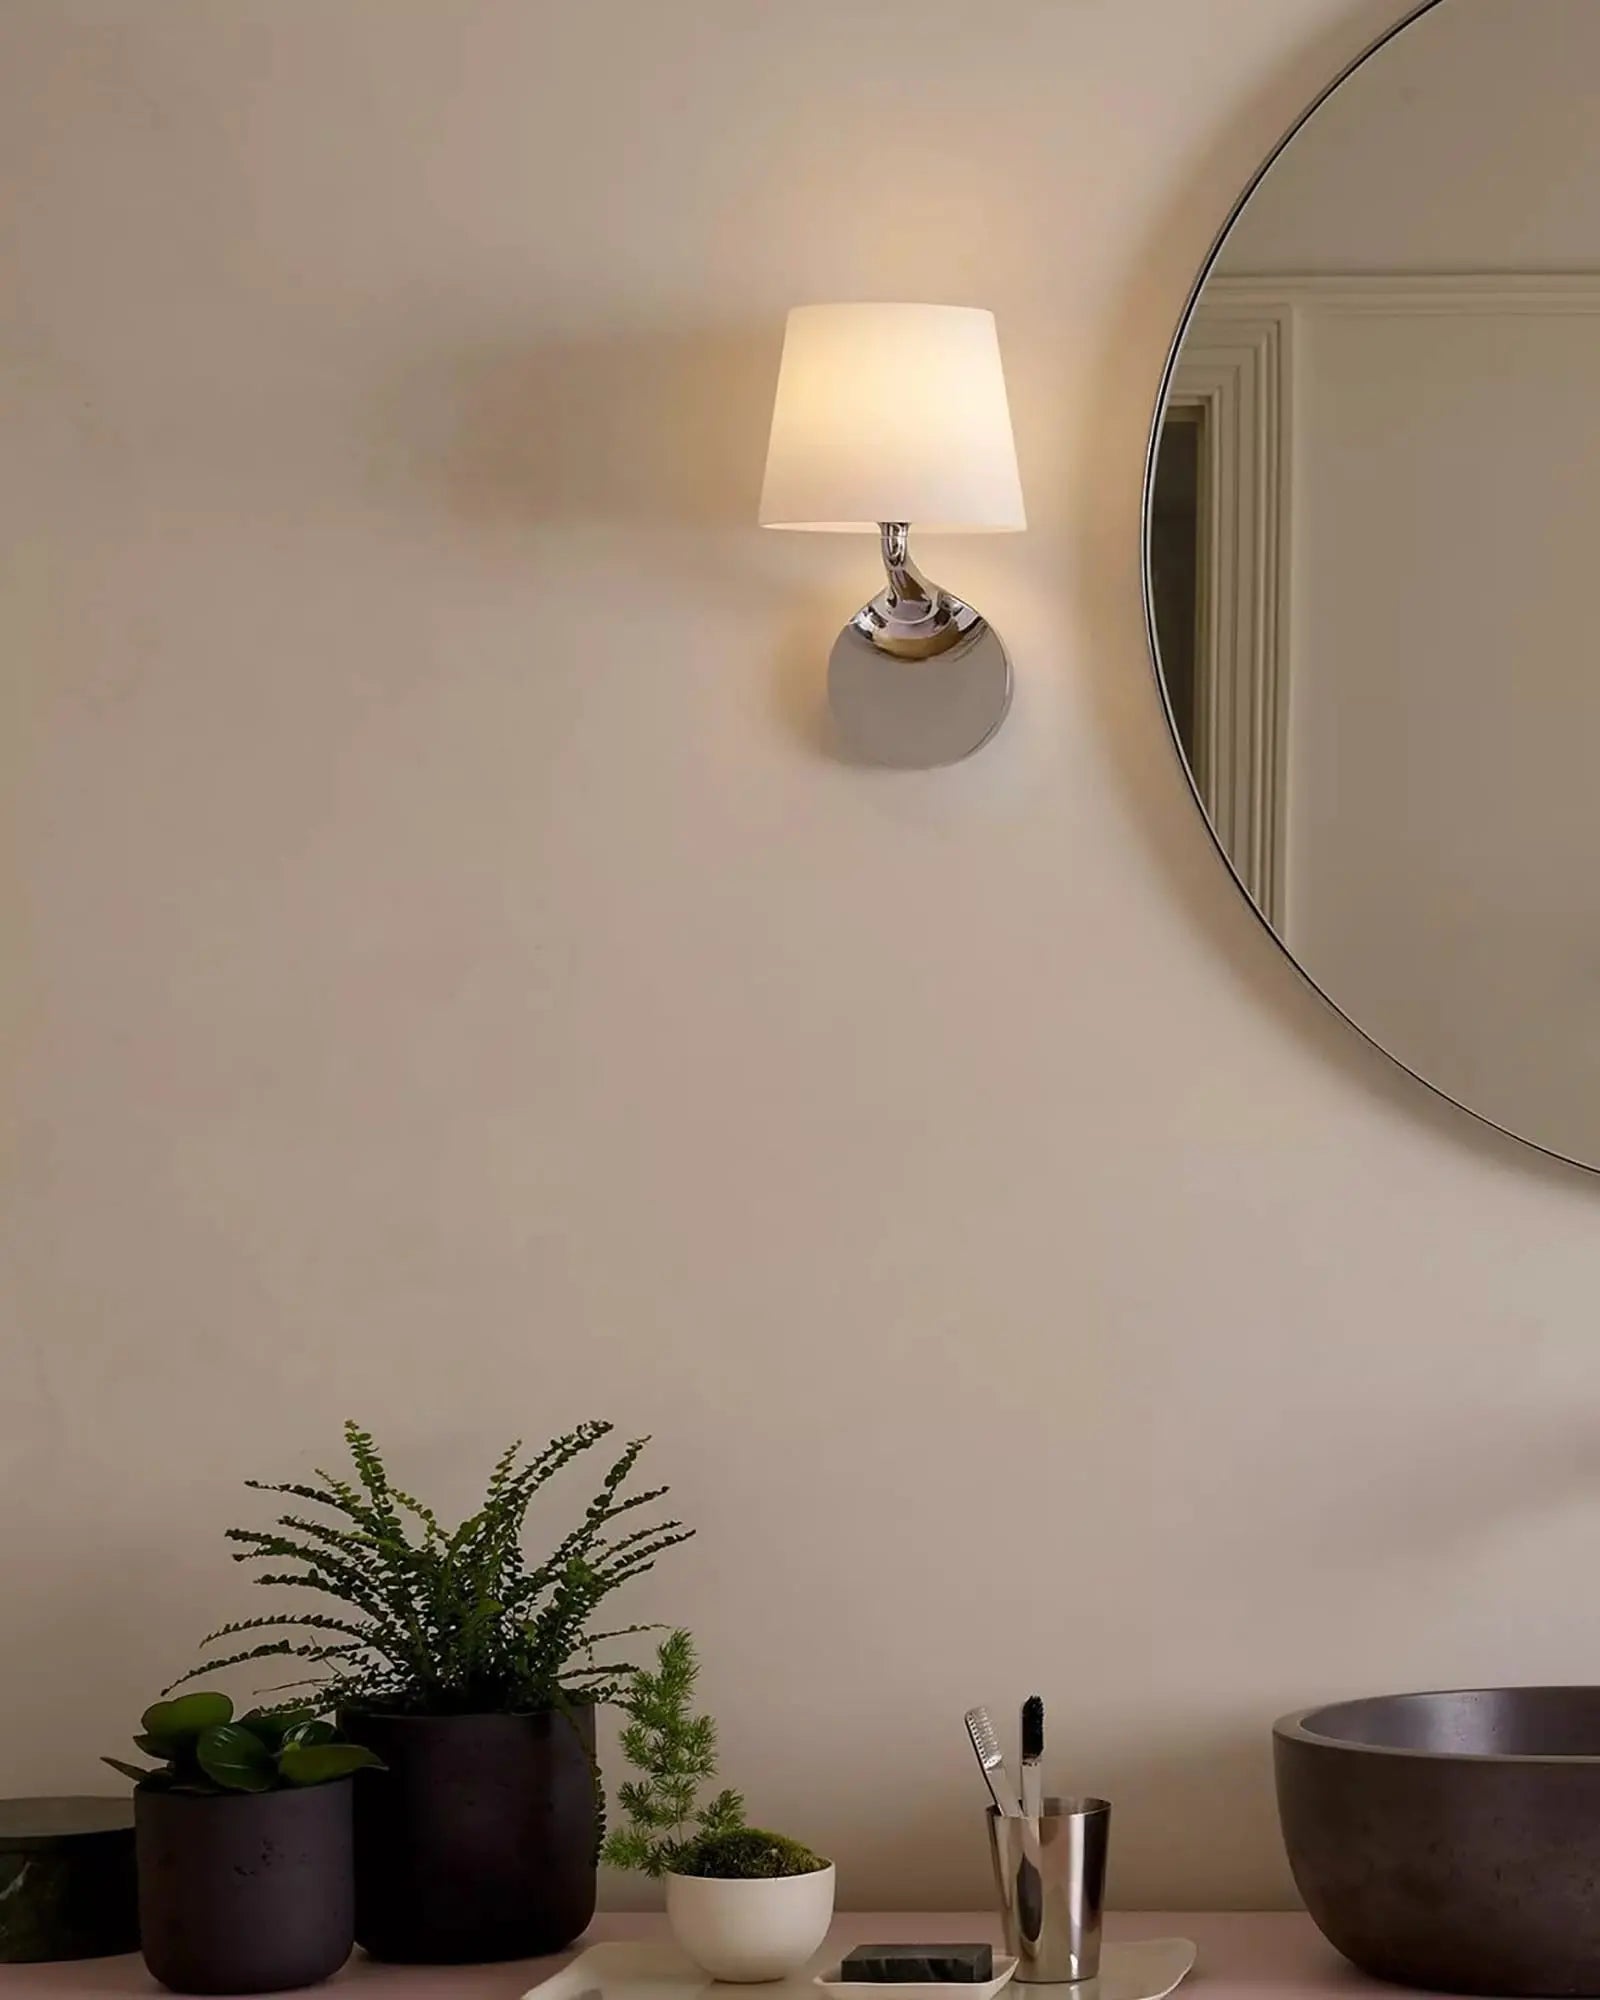 Millie contemporary curvy bathroom wall light with metal body and glass shade on the mirror's side